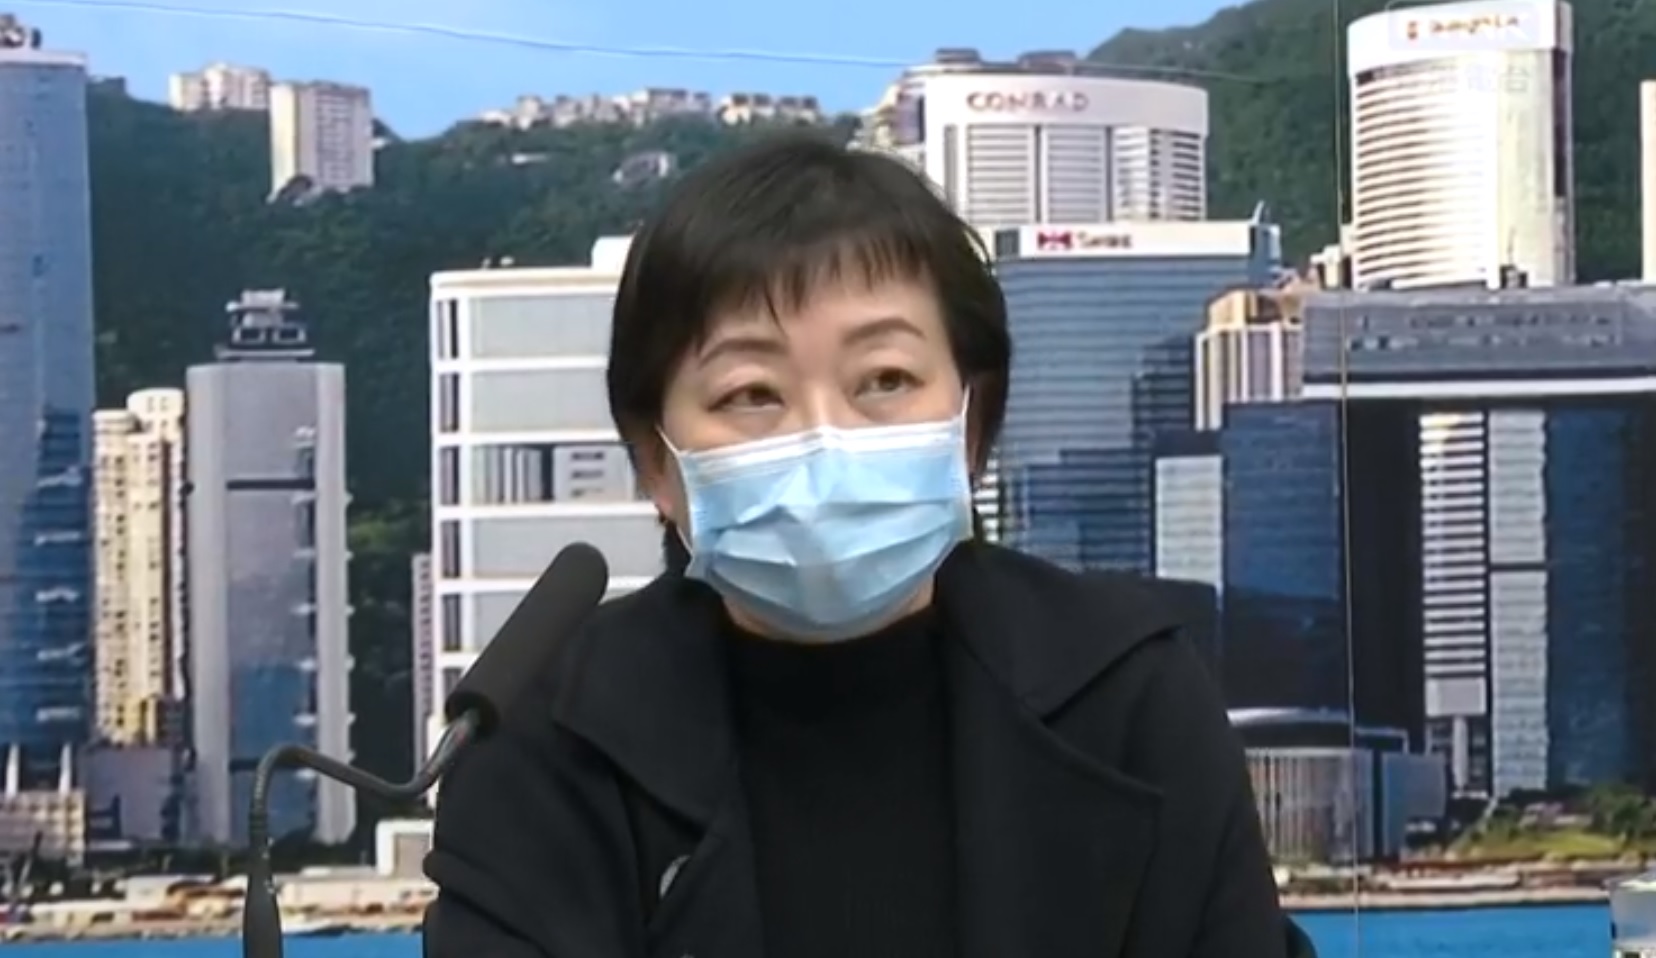 Dr Chuang Shuk-kwan of the Center for Health Protection giving the daily coronavirus briefing on April 16, 2020. Screengrab: RTHK via Facebook